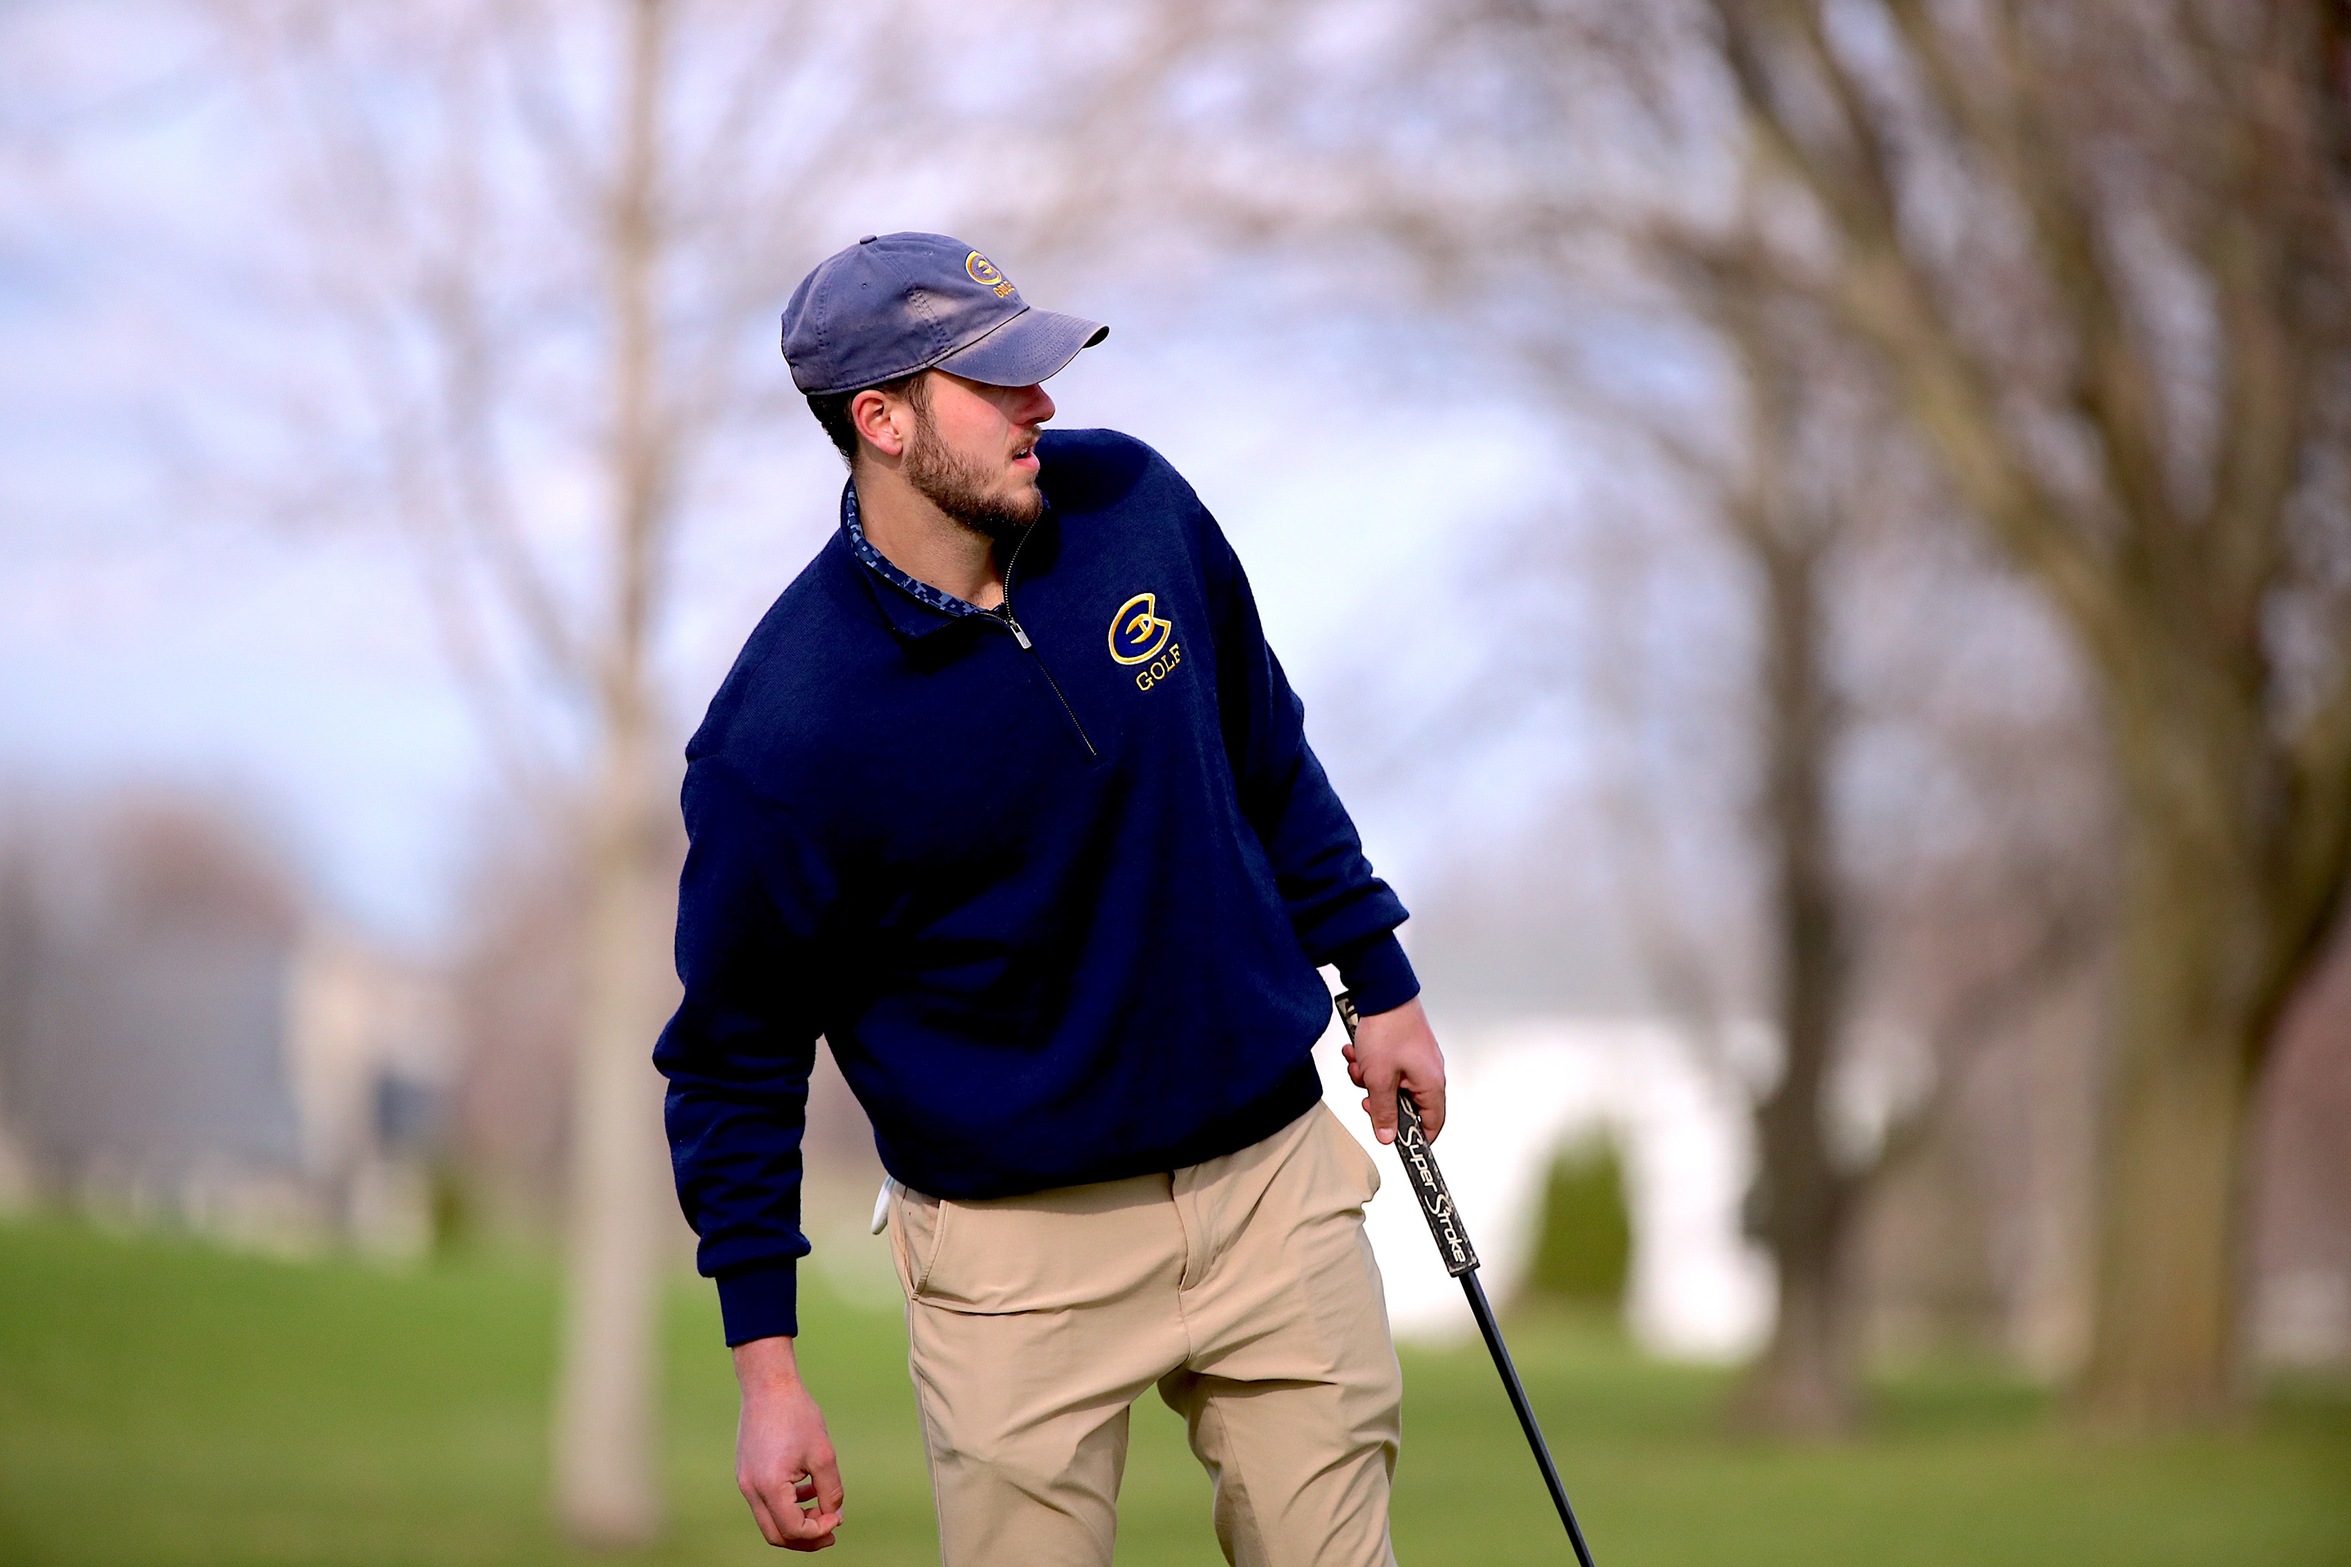 Men's Golf Completes First Day at Augsburg Invitational